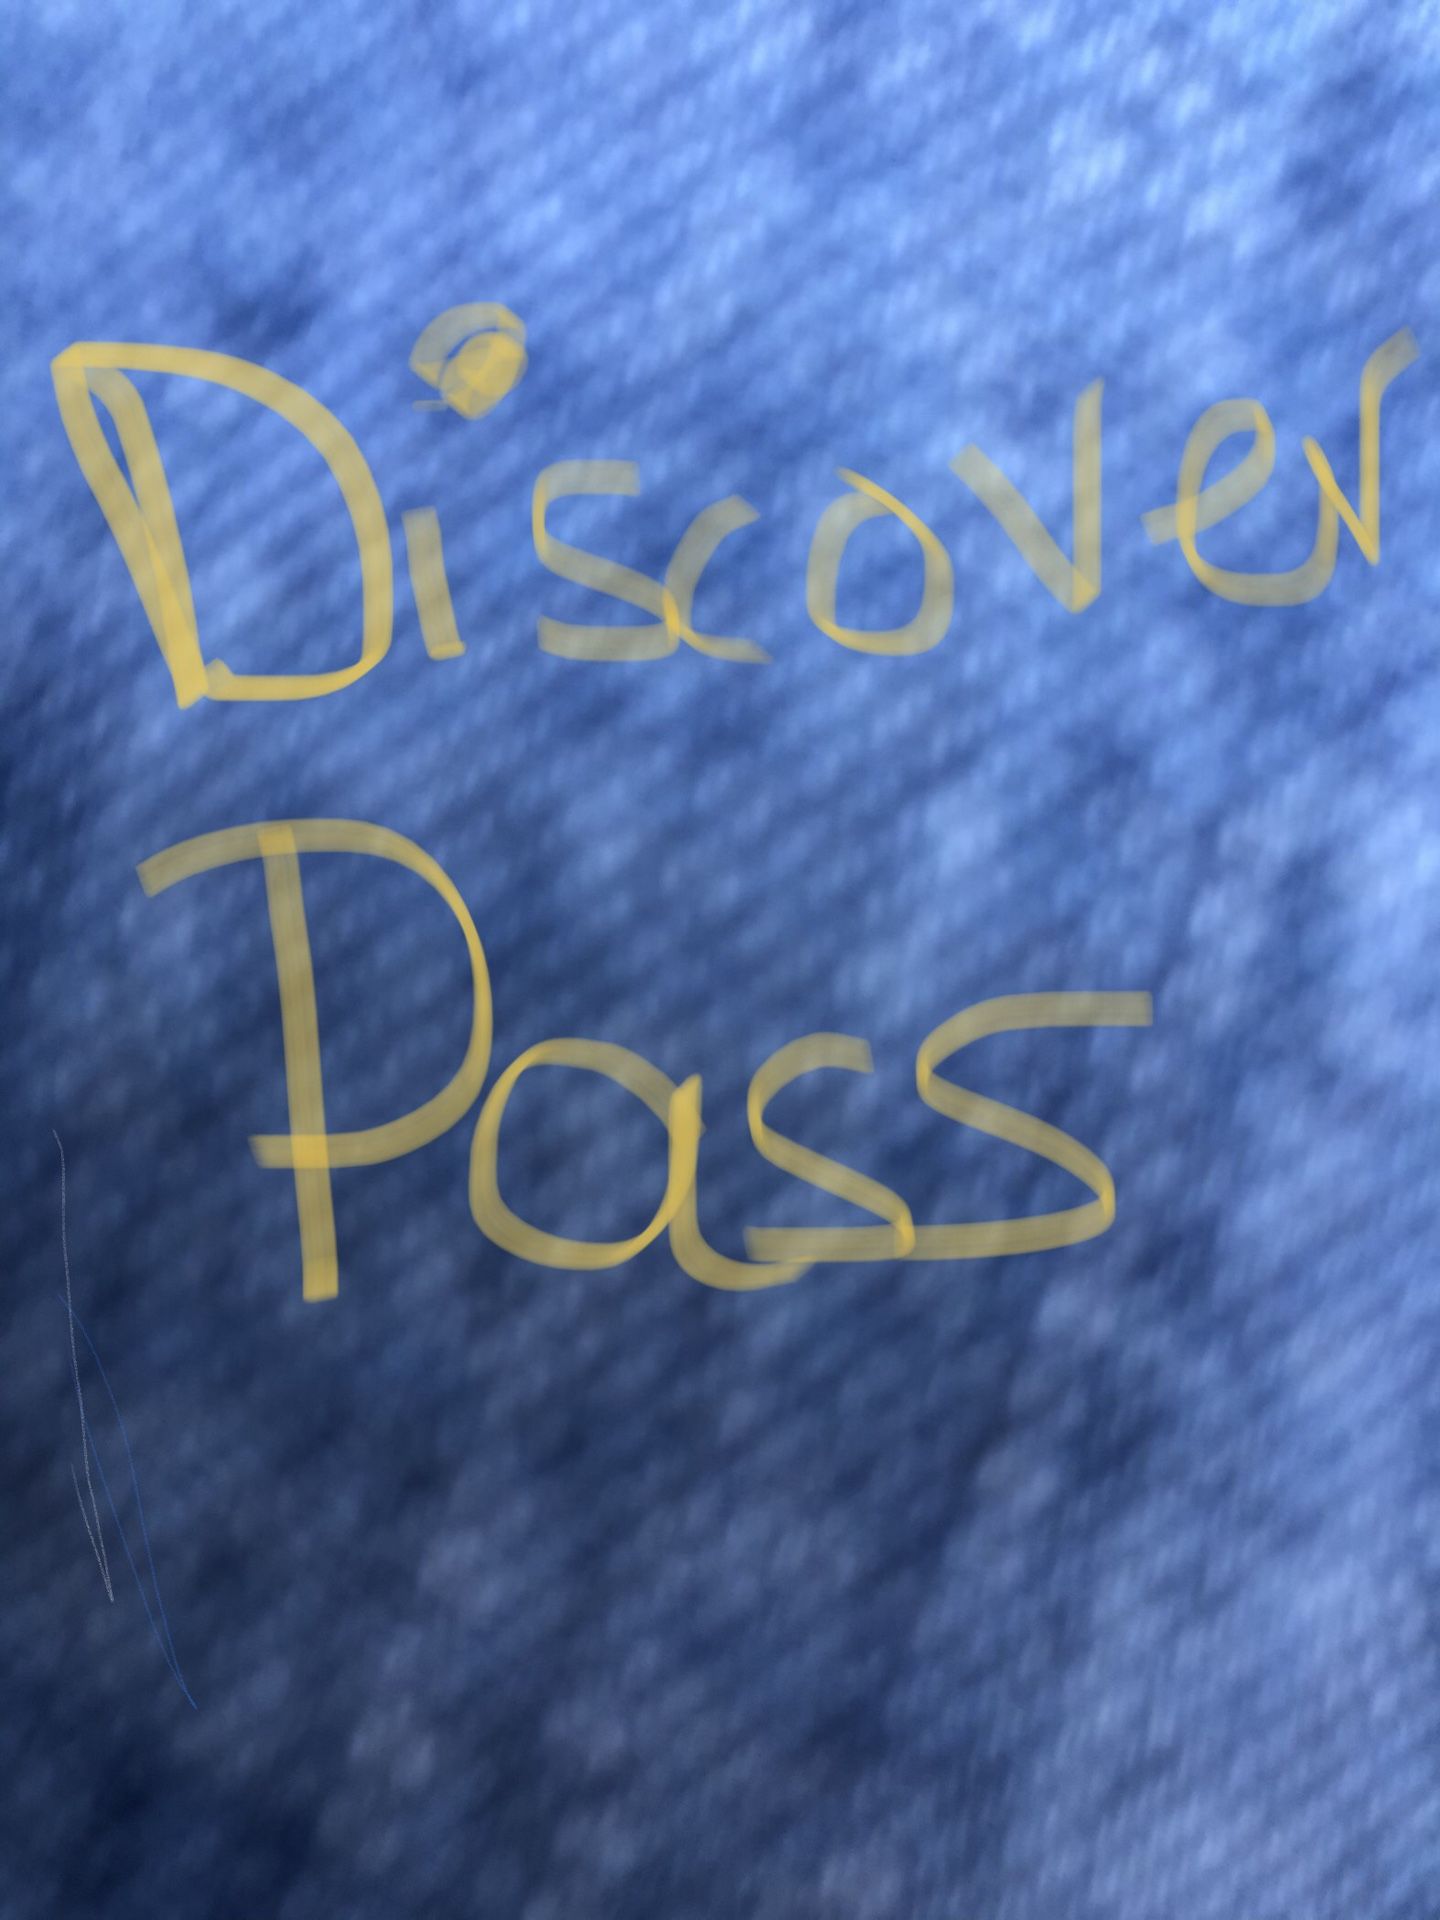 Discover pass